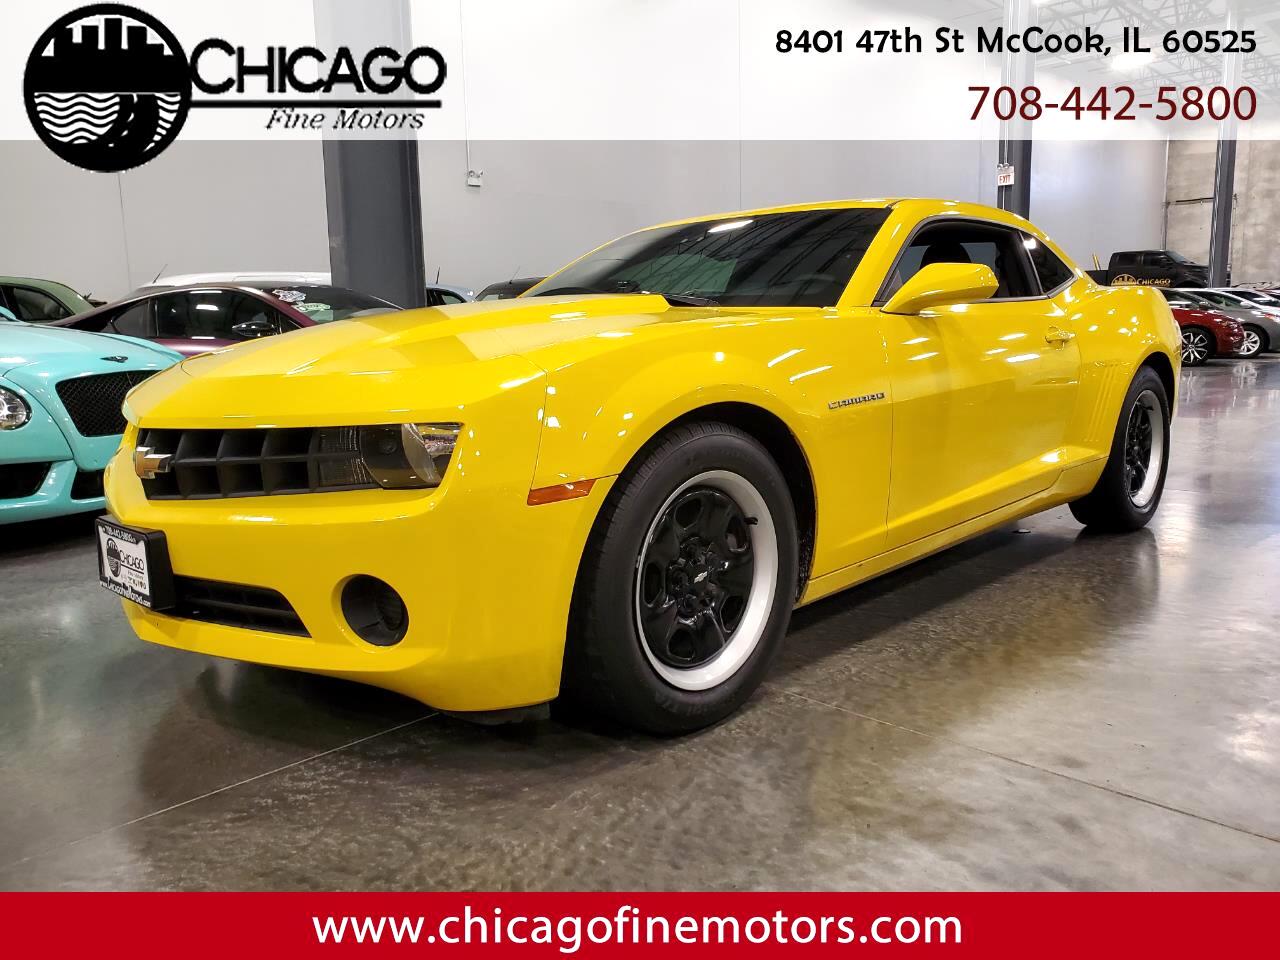 Used Cars For Sale Mccook Il 60525 Chicago Fine Motors